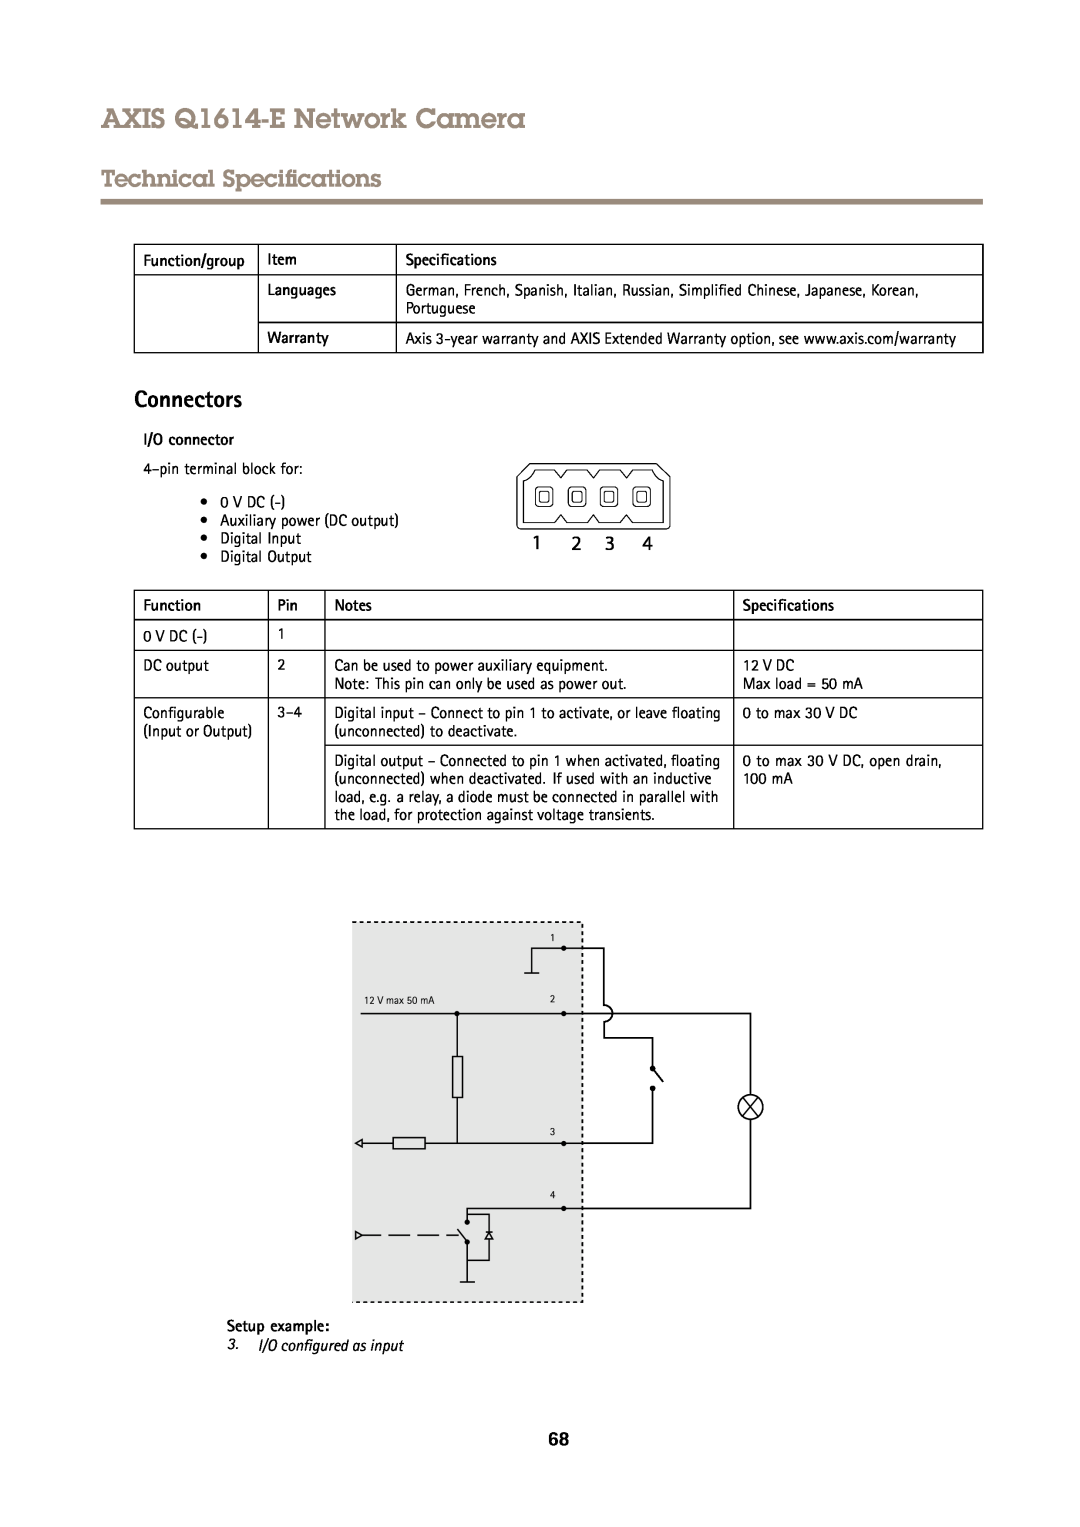 Axis Communications Q1614-E user manual Connectors, Languages, Portuguese, Warranty, I/O connector, Function, Setup example 